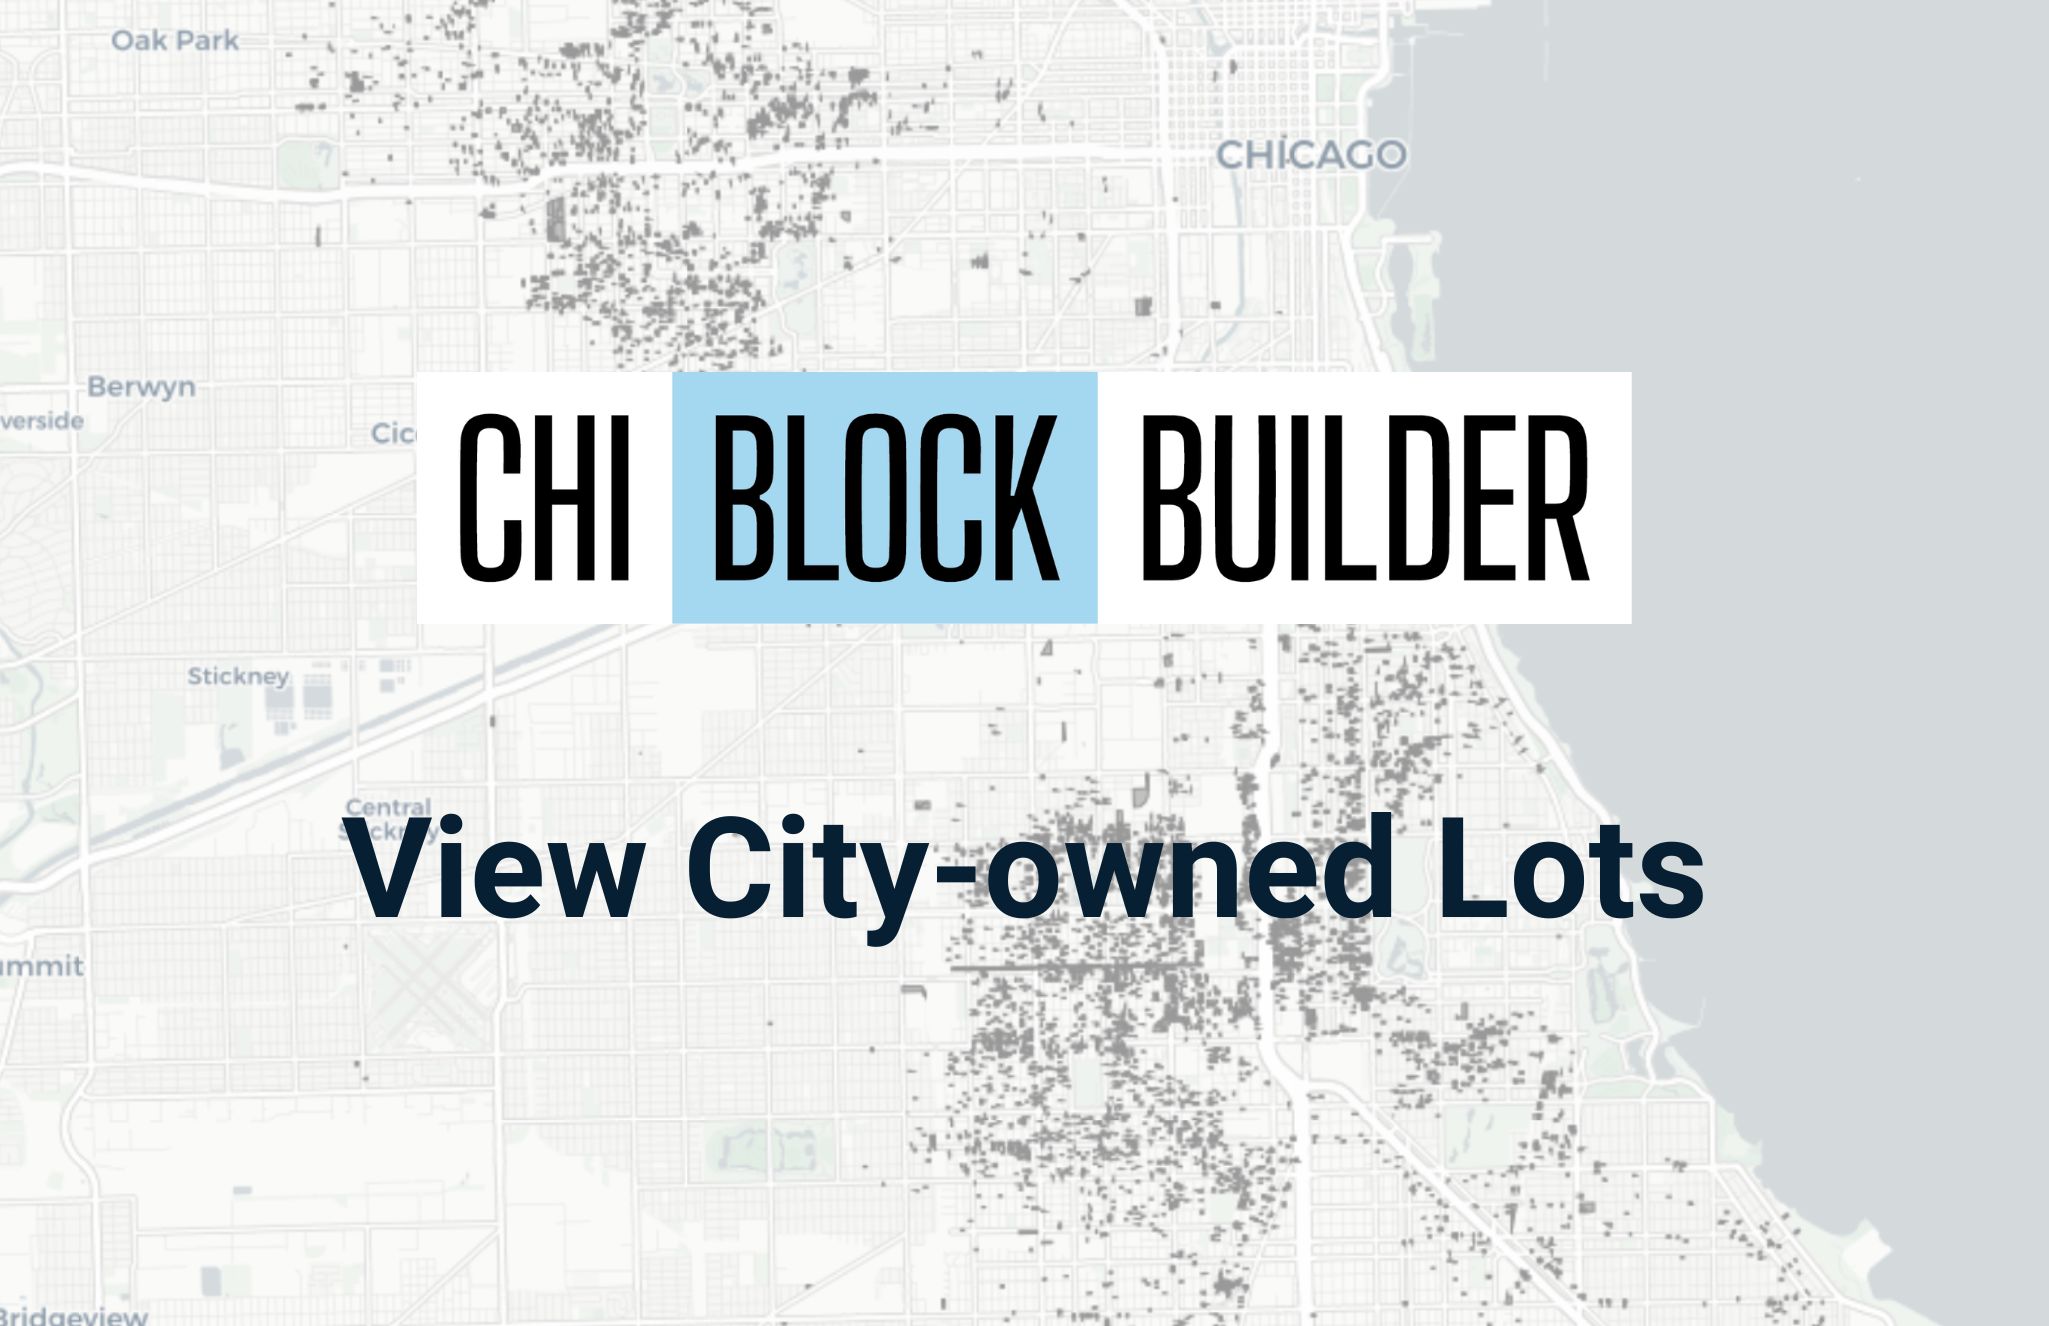 View City-owned Lots